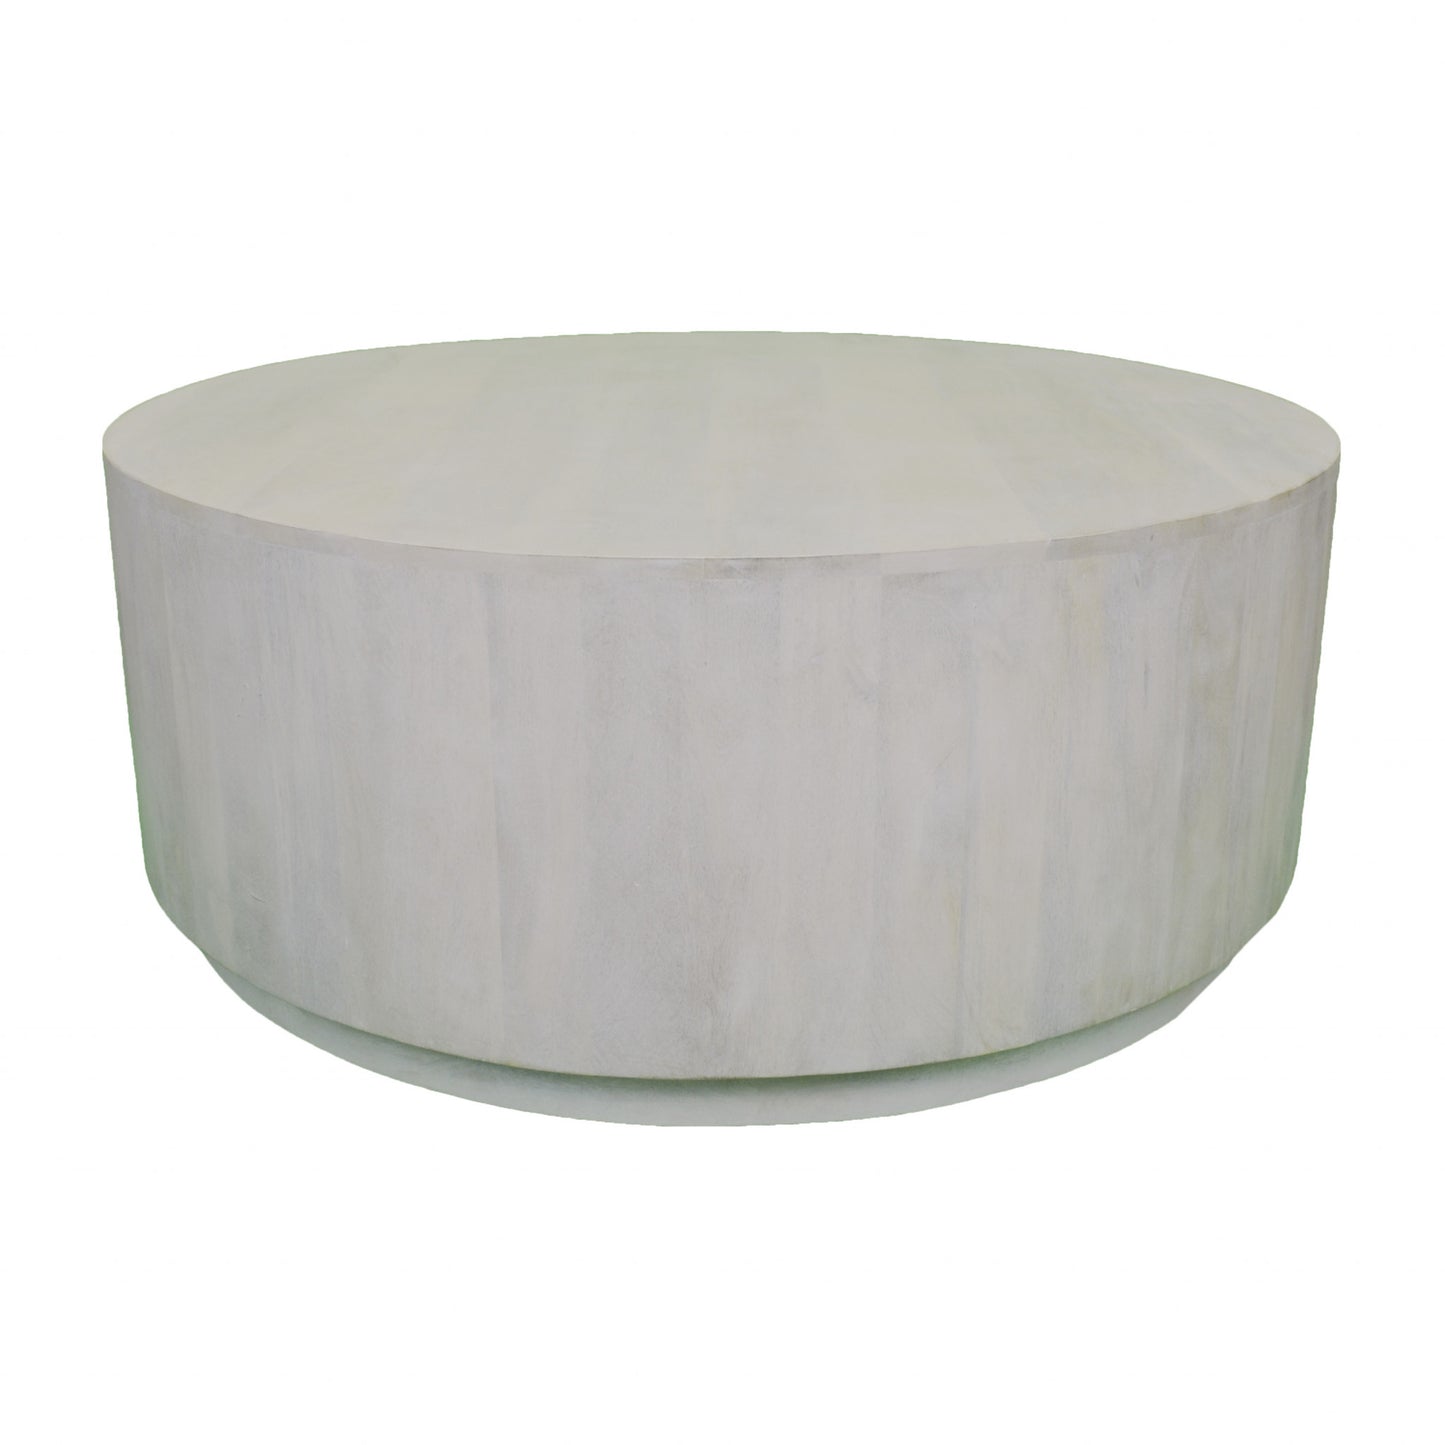 42" Rustic White Solid Wood Round Distressed Coffee Table